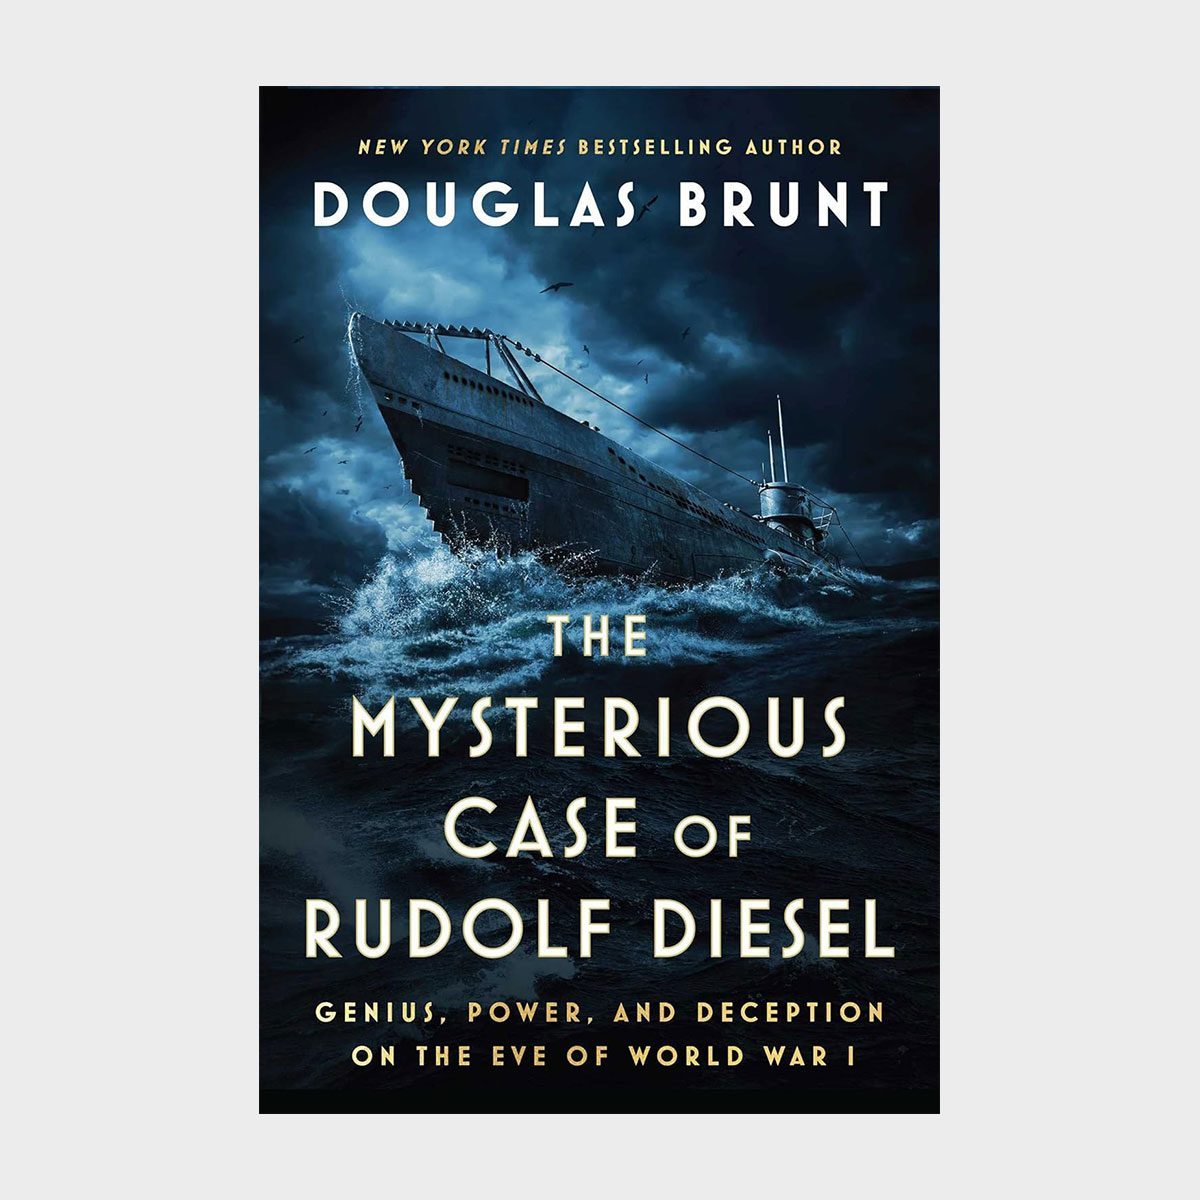 The Mysterious Case Of Rudolf Diesel Genius, Power And Deception On The Eve Of World War I By Douglas Brunt